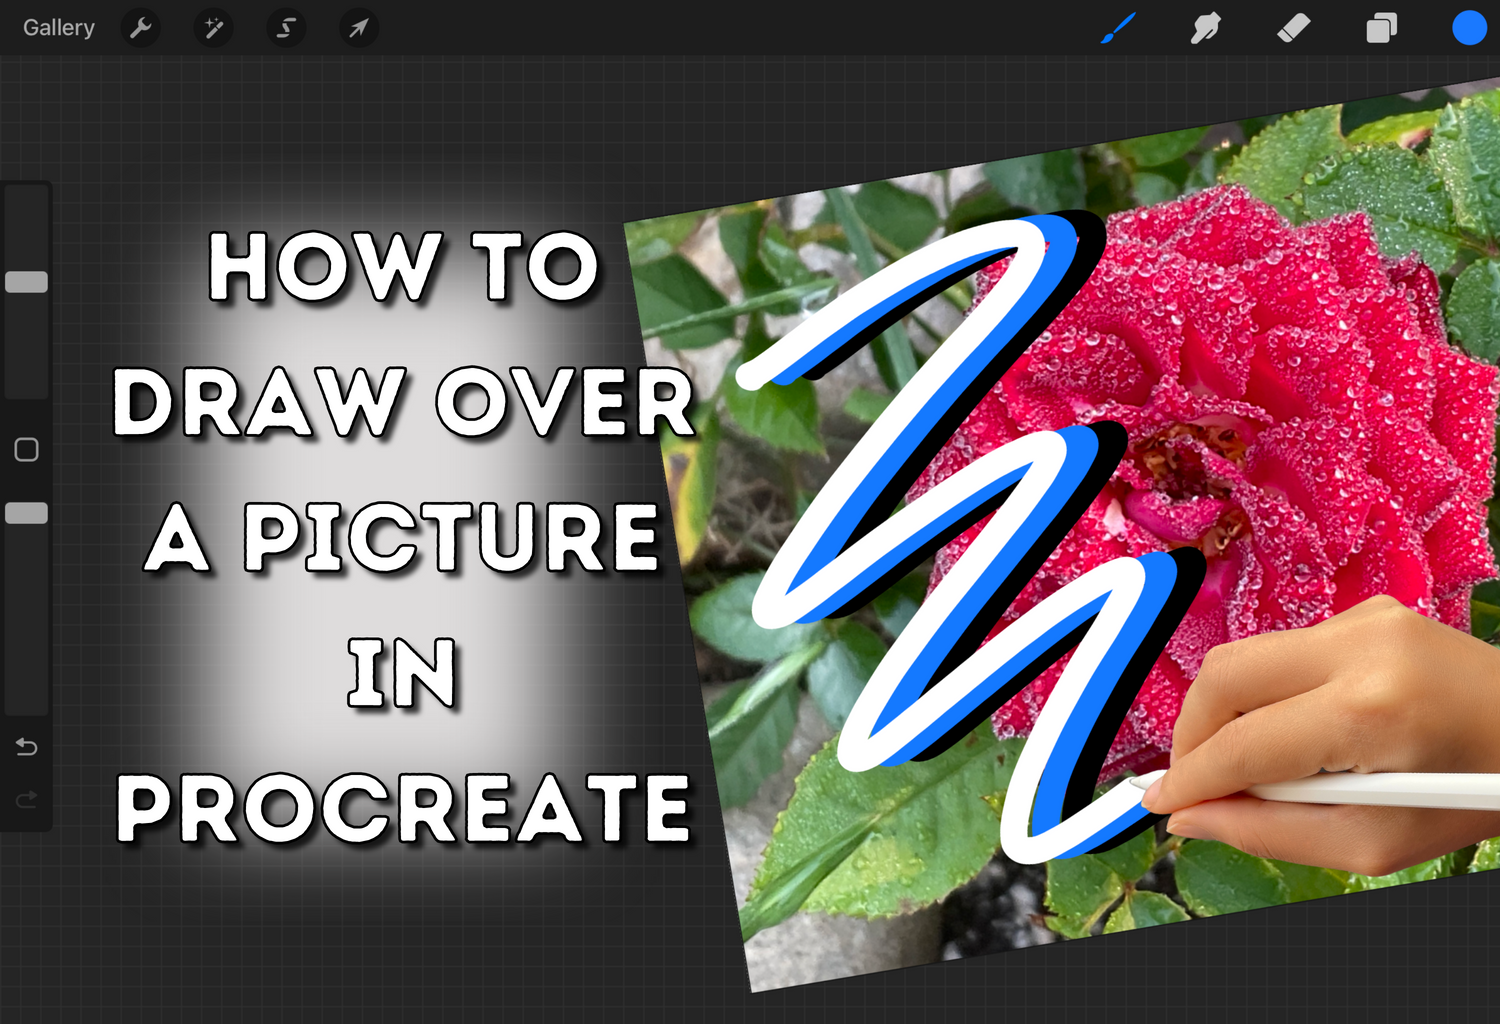 How to draw over a picture in Procreate use Procreate to draw over p